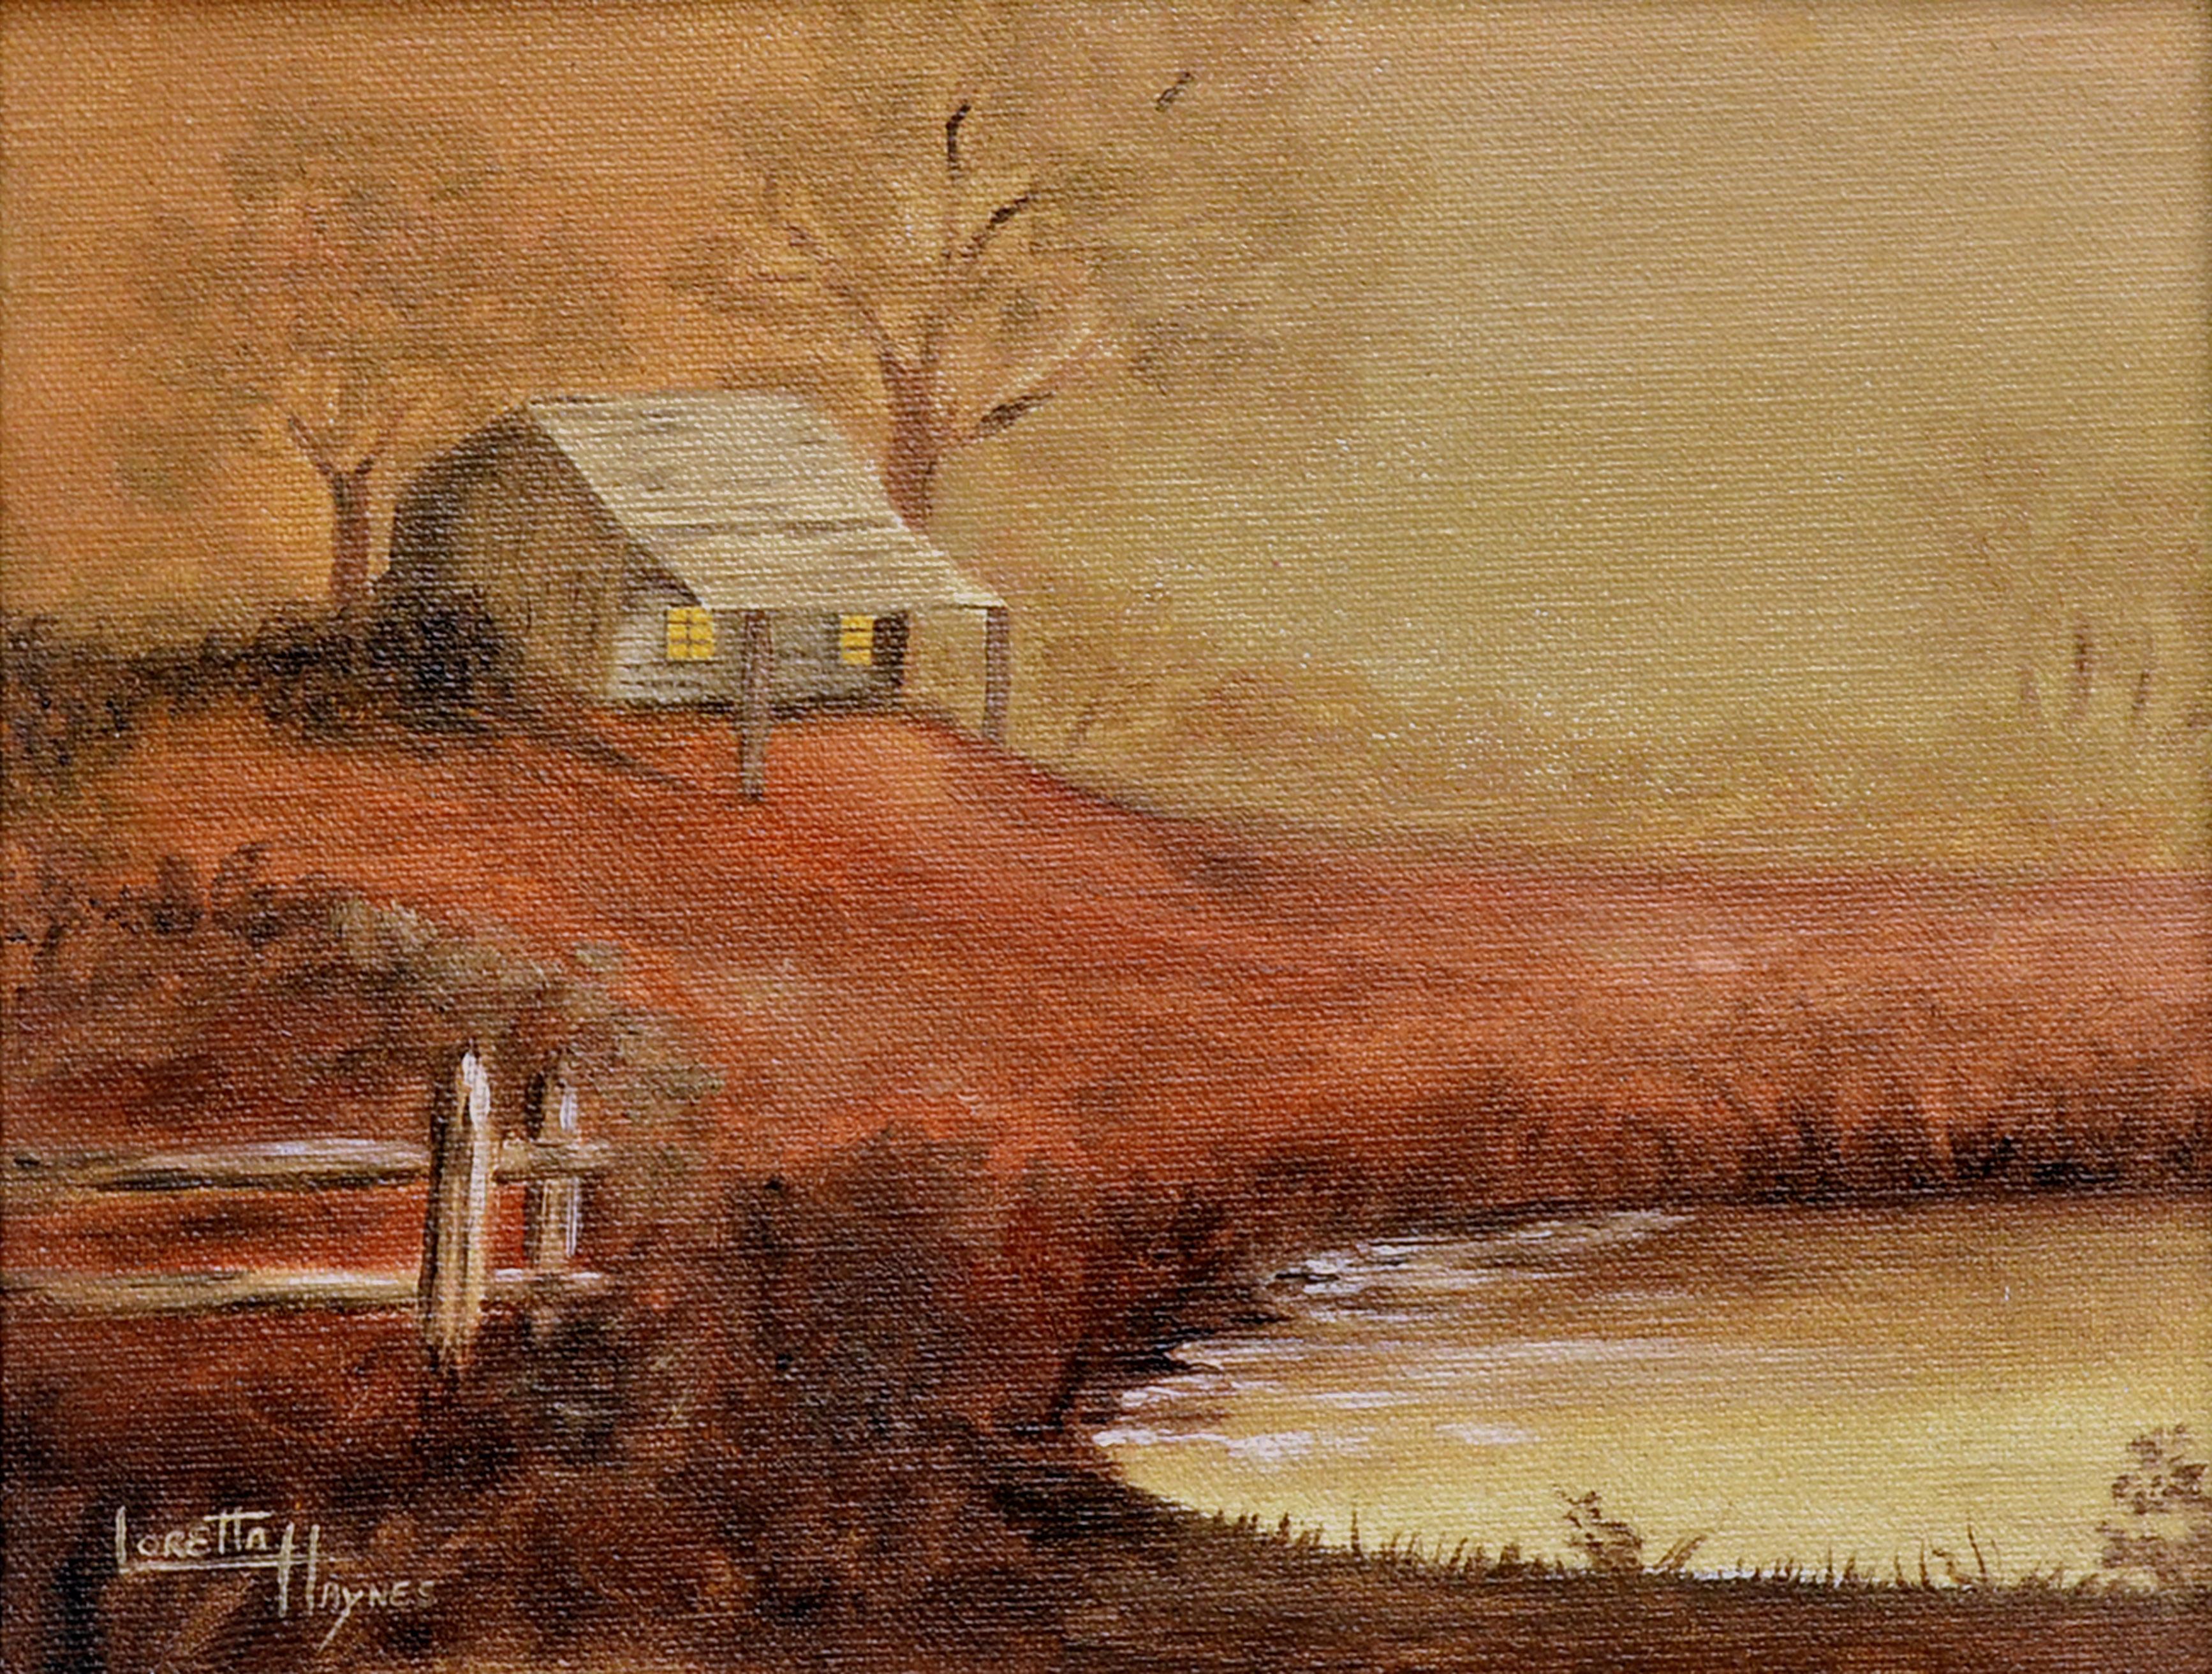 Autumnal Country Cabin Landscape - Painting by Loretta Haynes